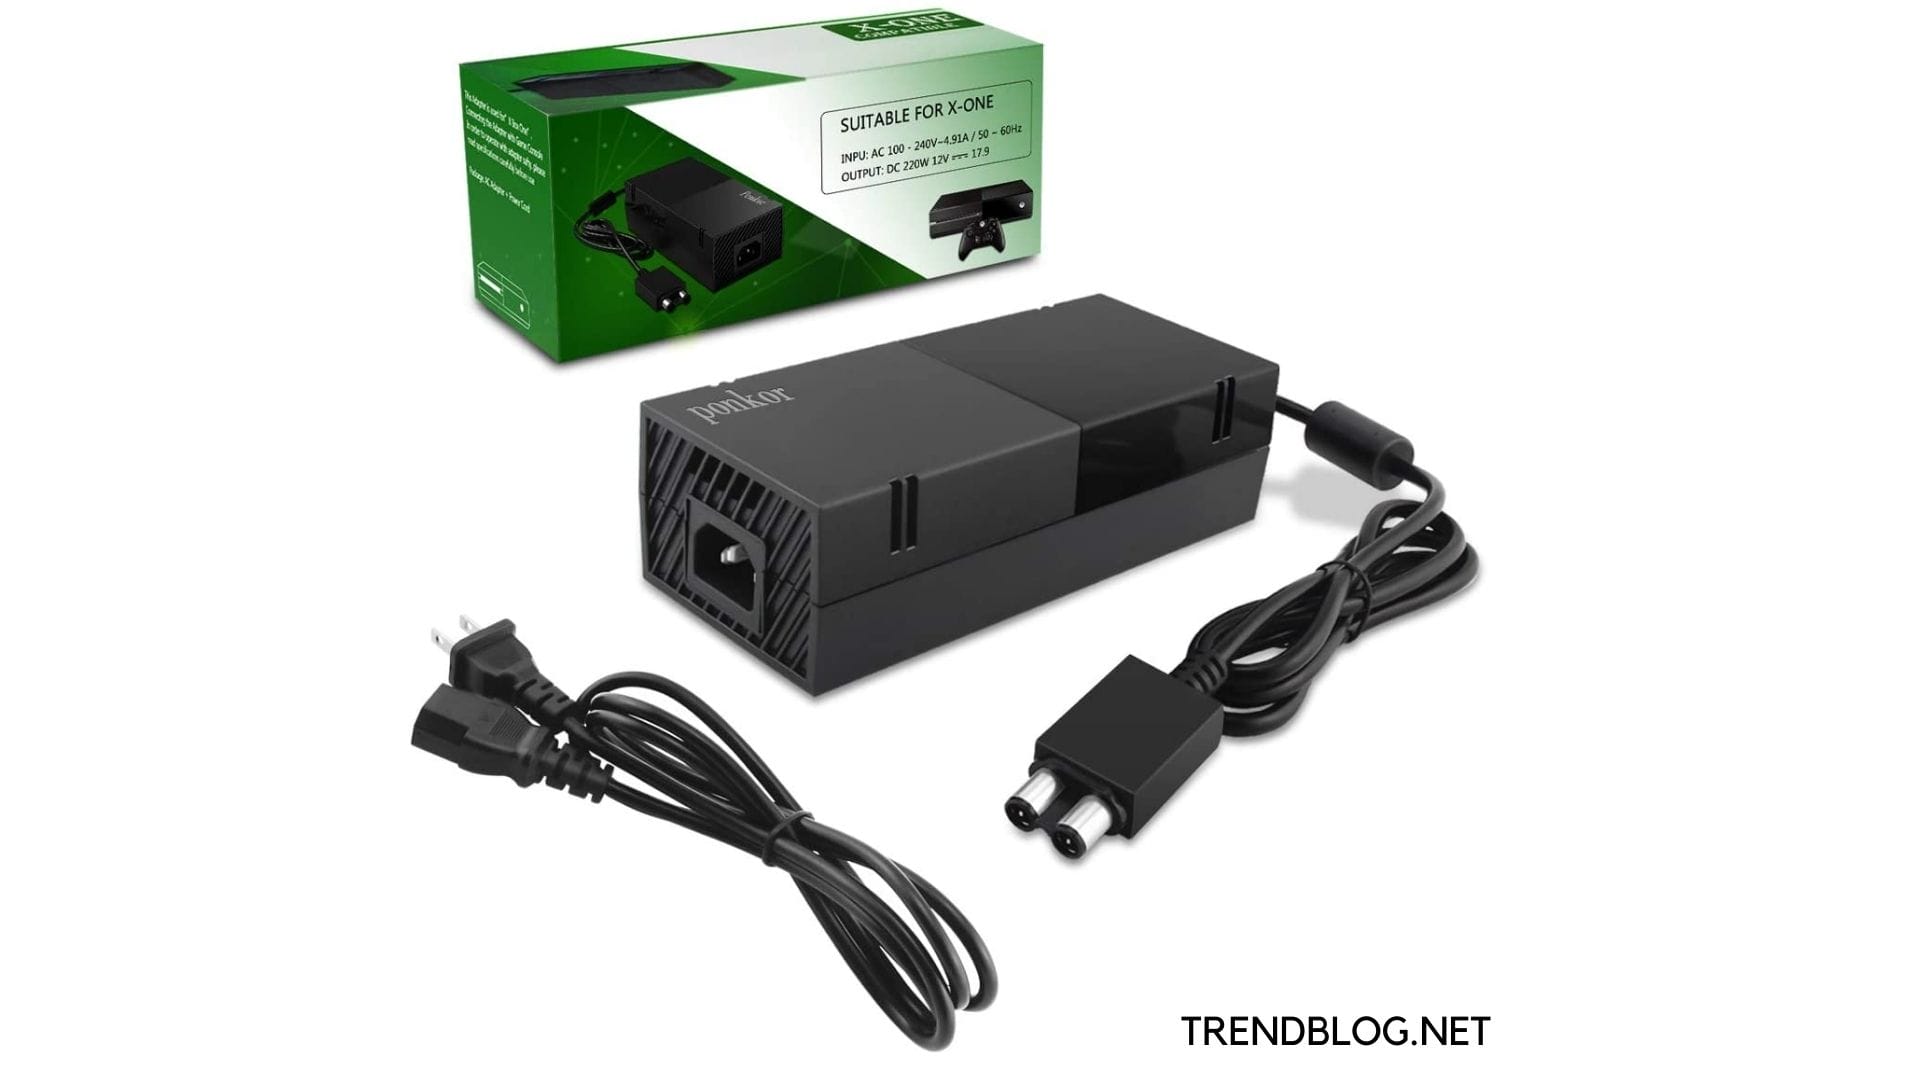   Xbox One Power Cord, How to Connect to Xbox, AC, DC